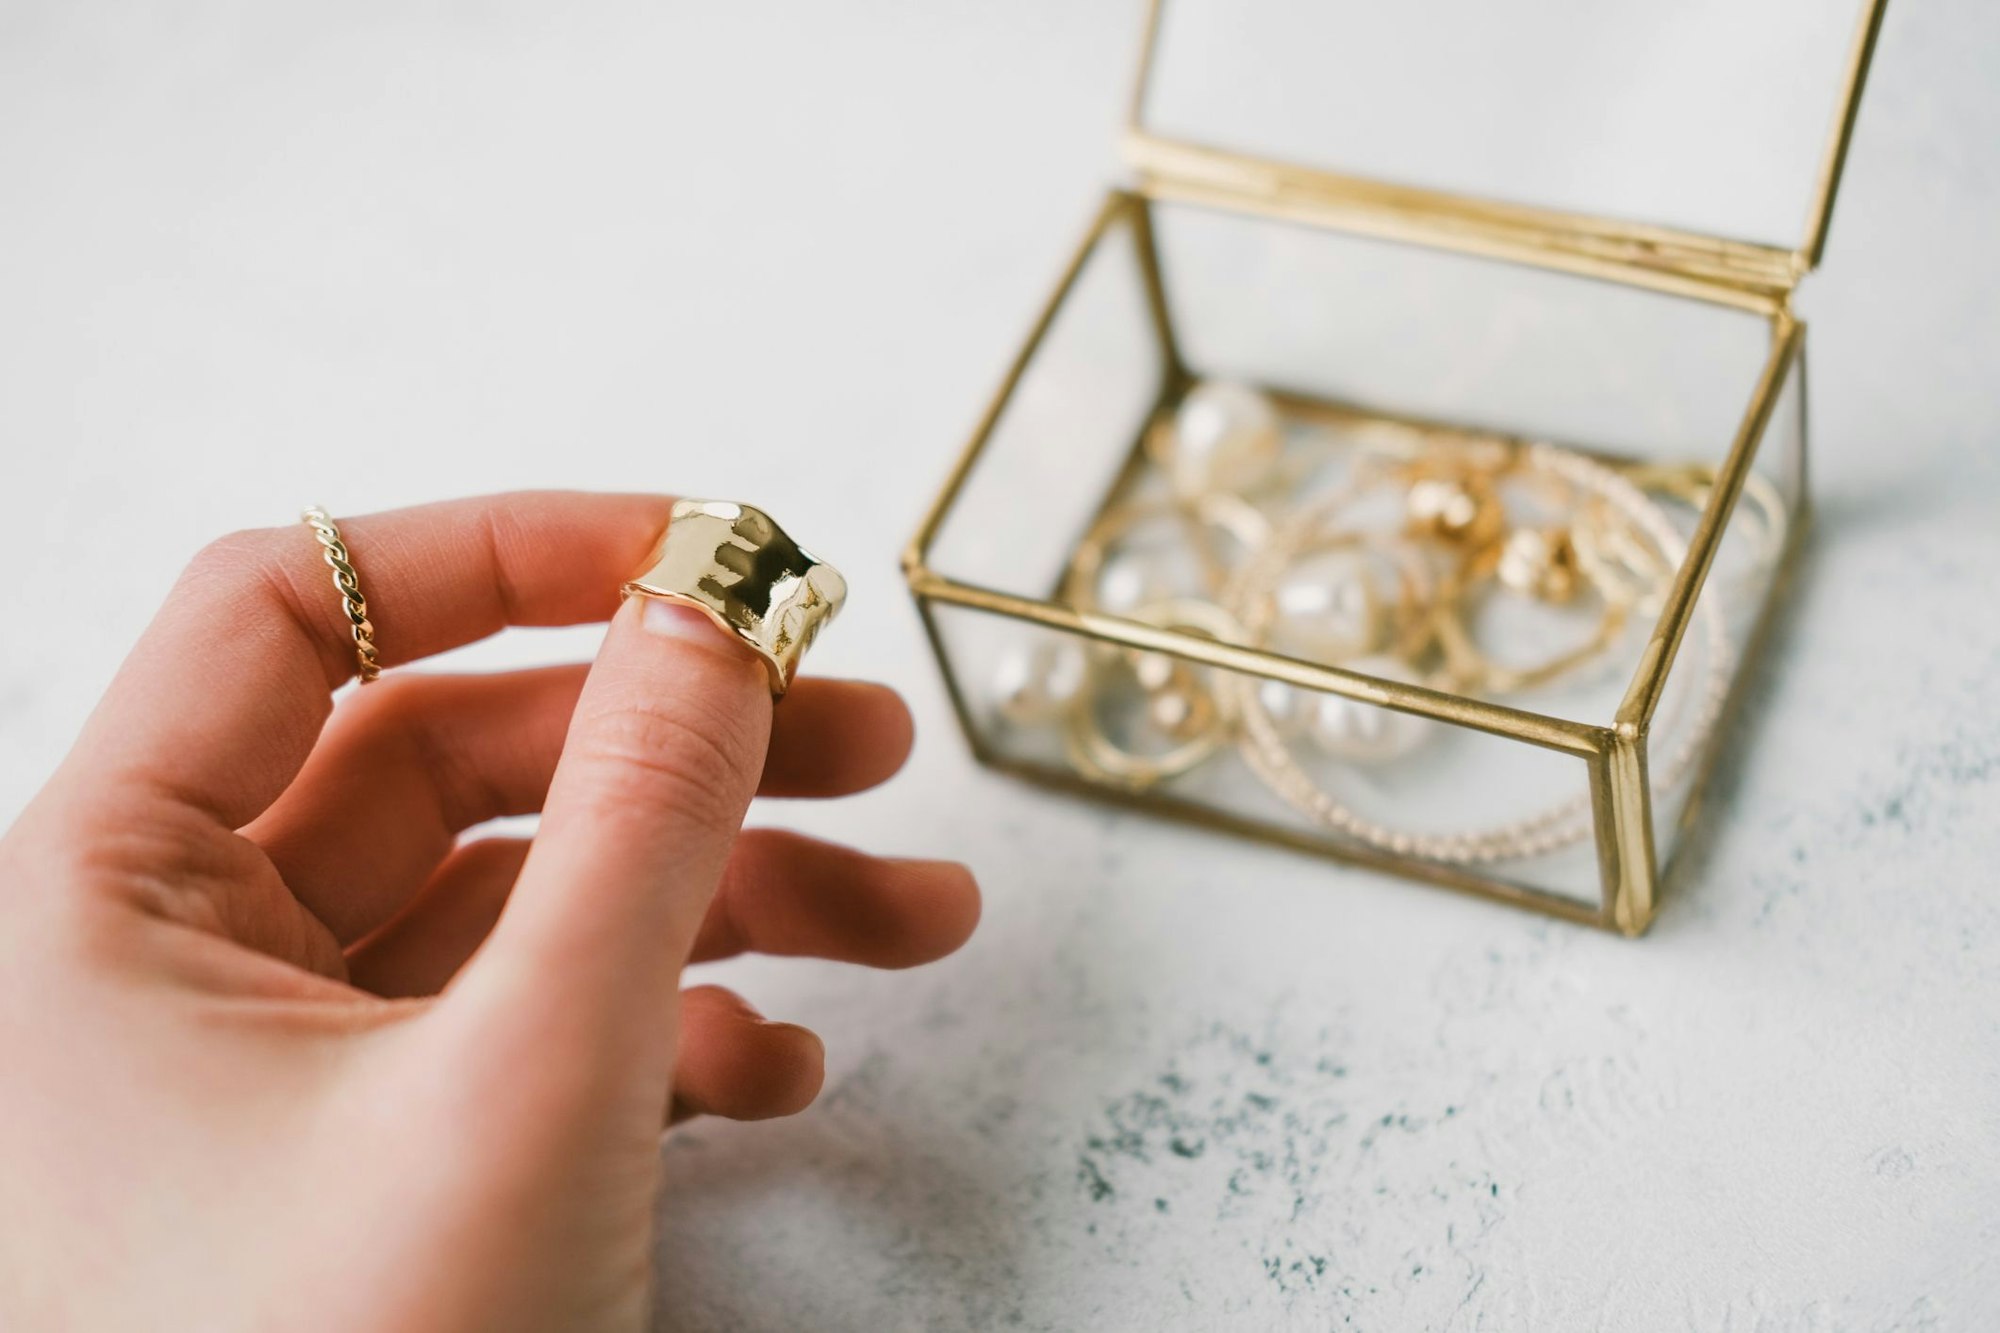 A woman's hand holds a gold ring on the background of a transparent jewelry box with accessories